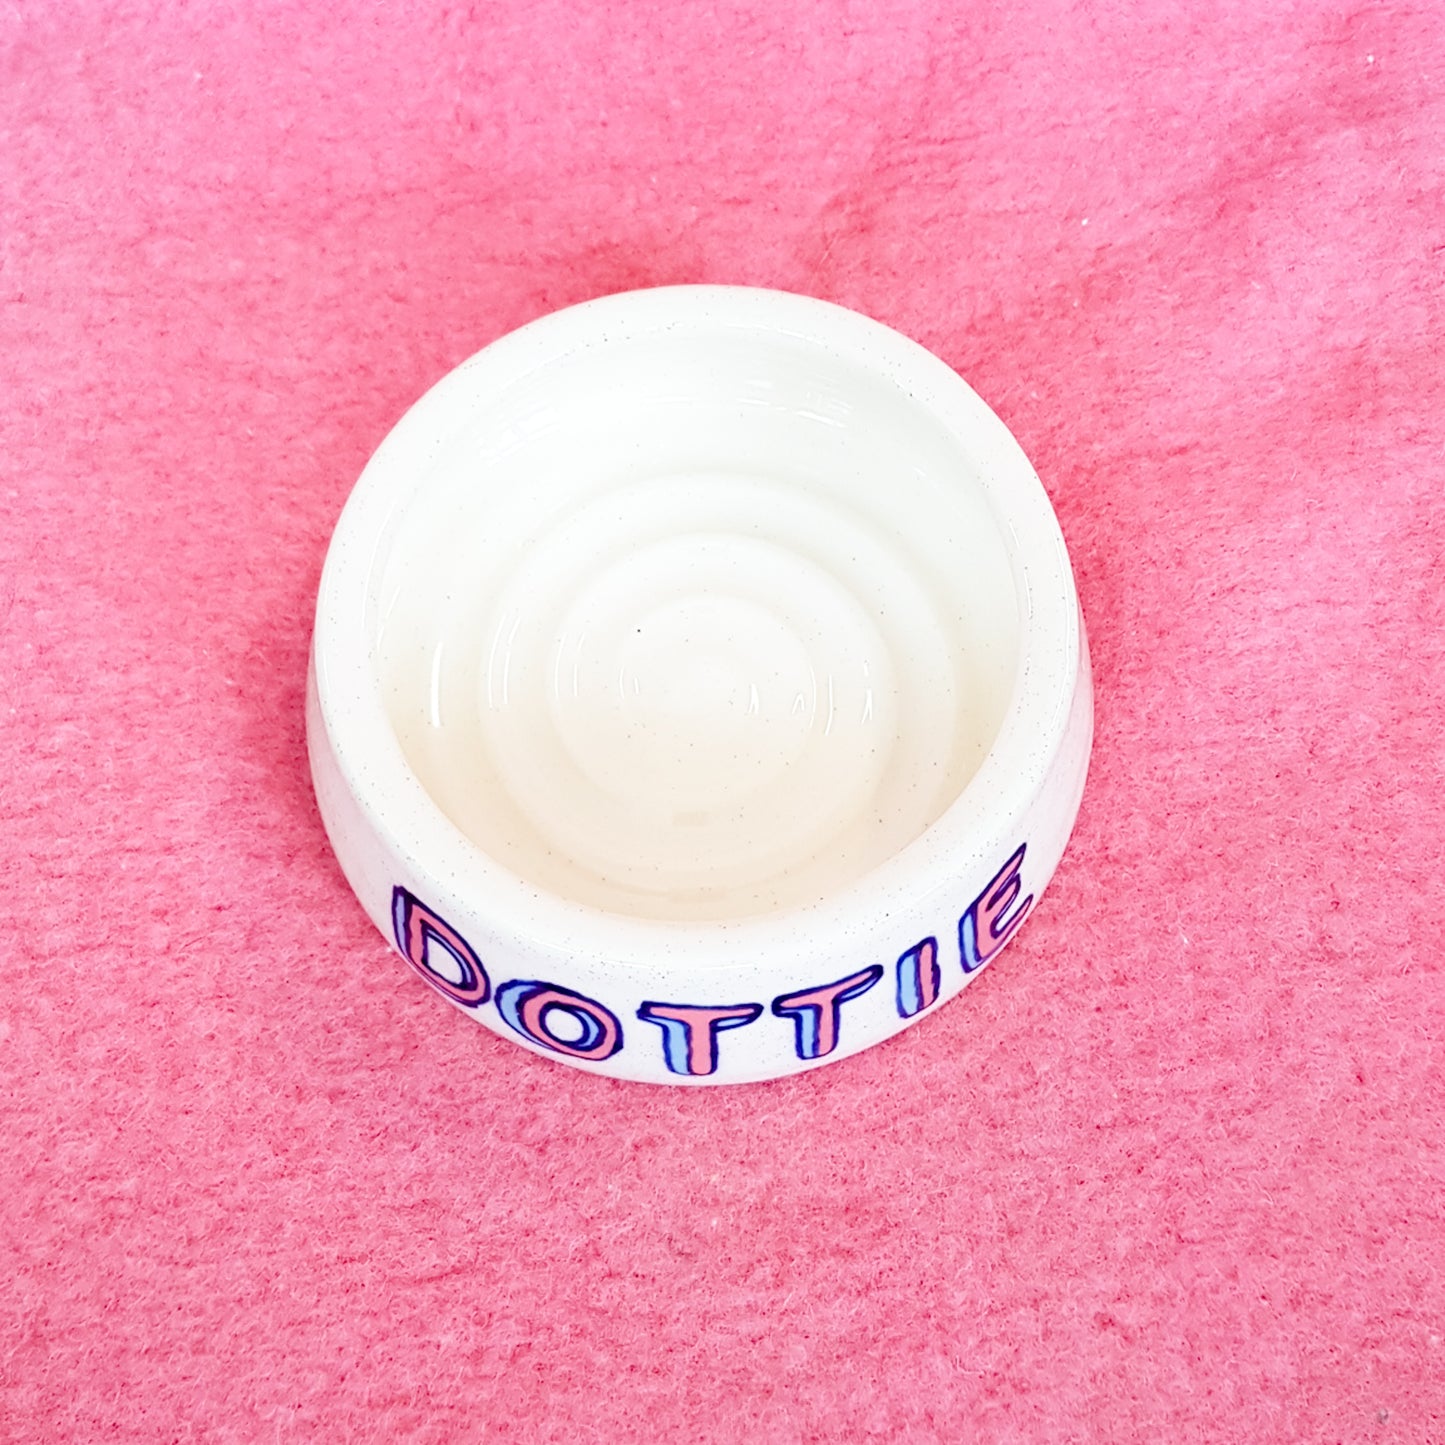 Small custom dog bowl - fundraiser for Chihuahua Rescue NZ